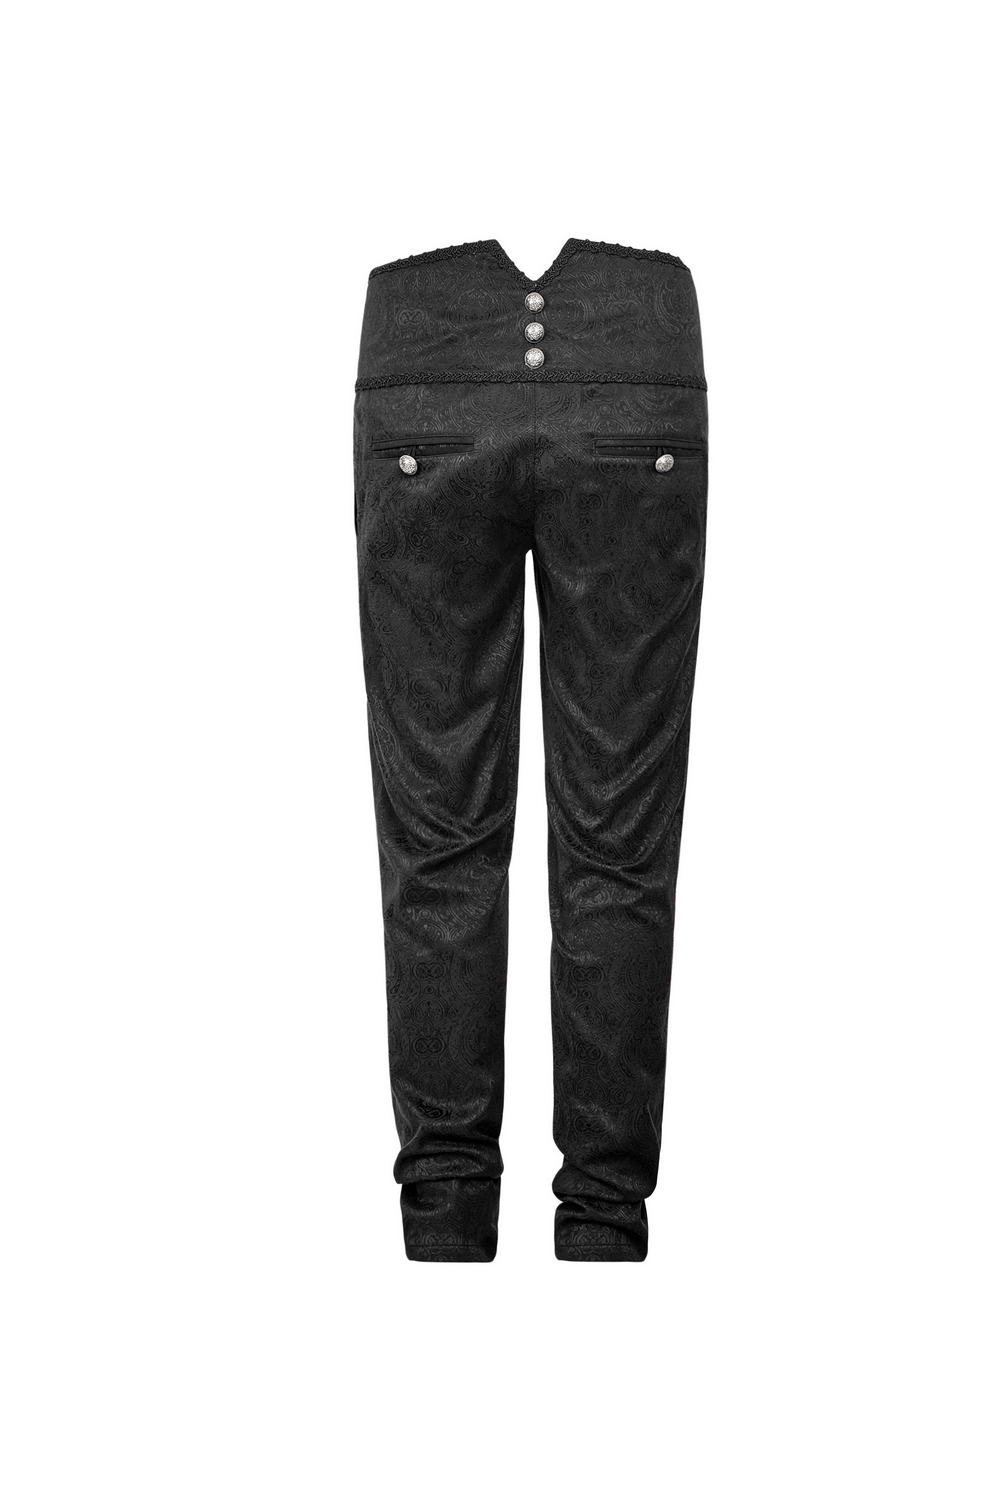 Gothic Peacock Buttons Jacquard Pants for Men